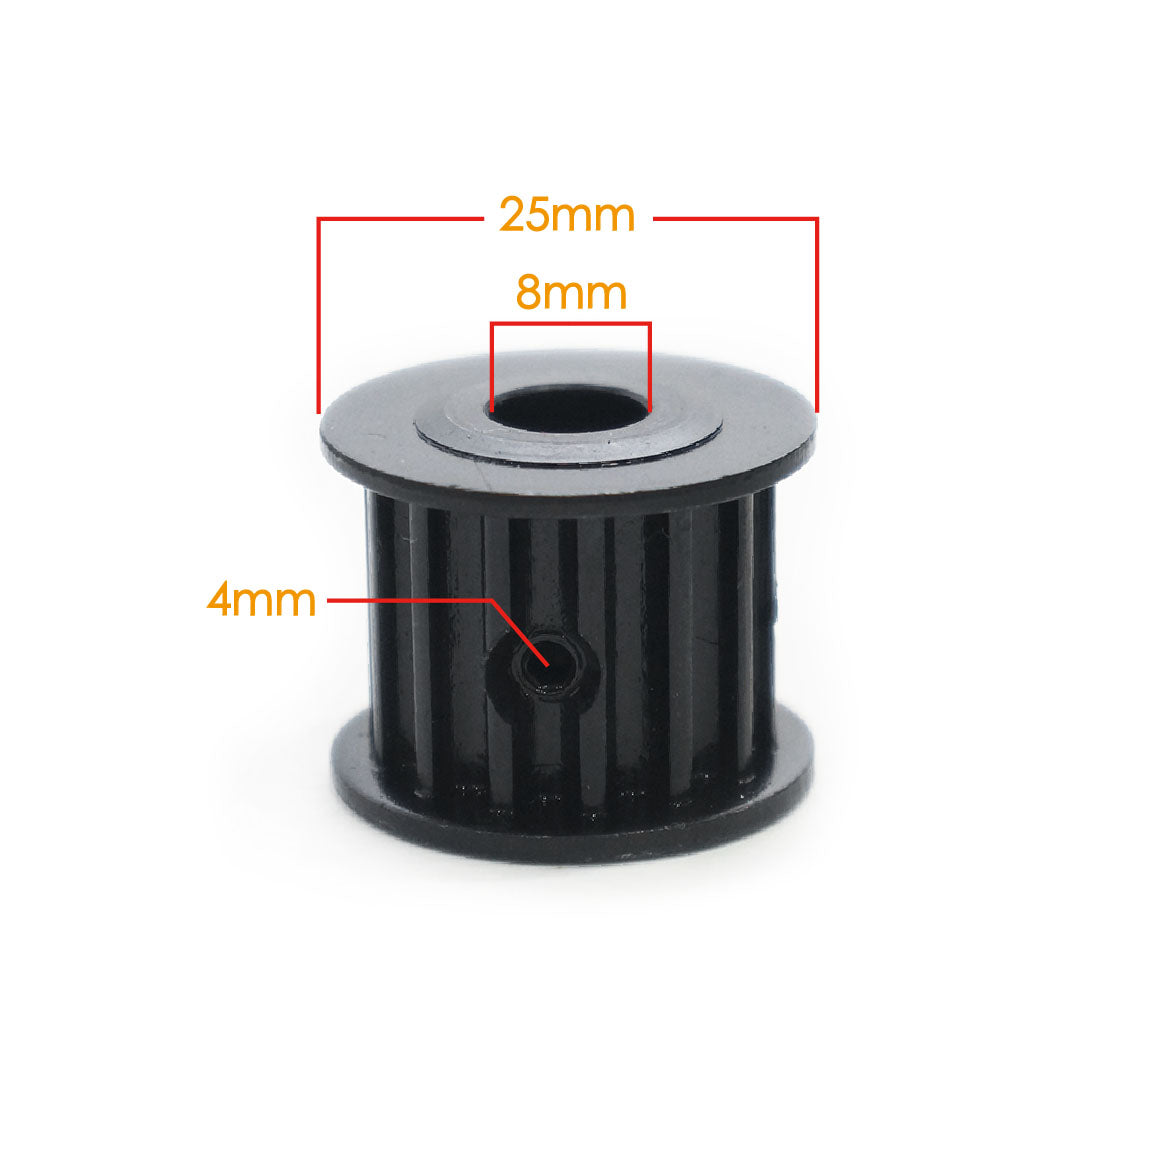 Maytech MTSKG2005 Motor Pulley with 8mm Hole 14T 5M 16mm Width Motor Pulley for Electric Skateboard Brushless Motor